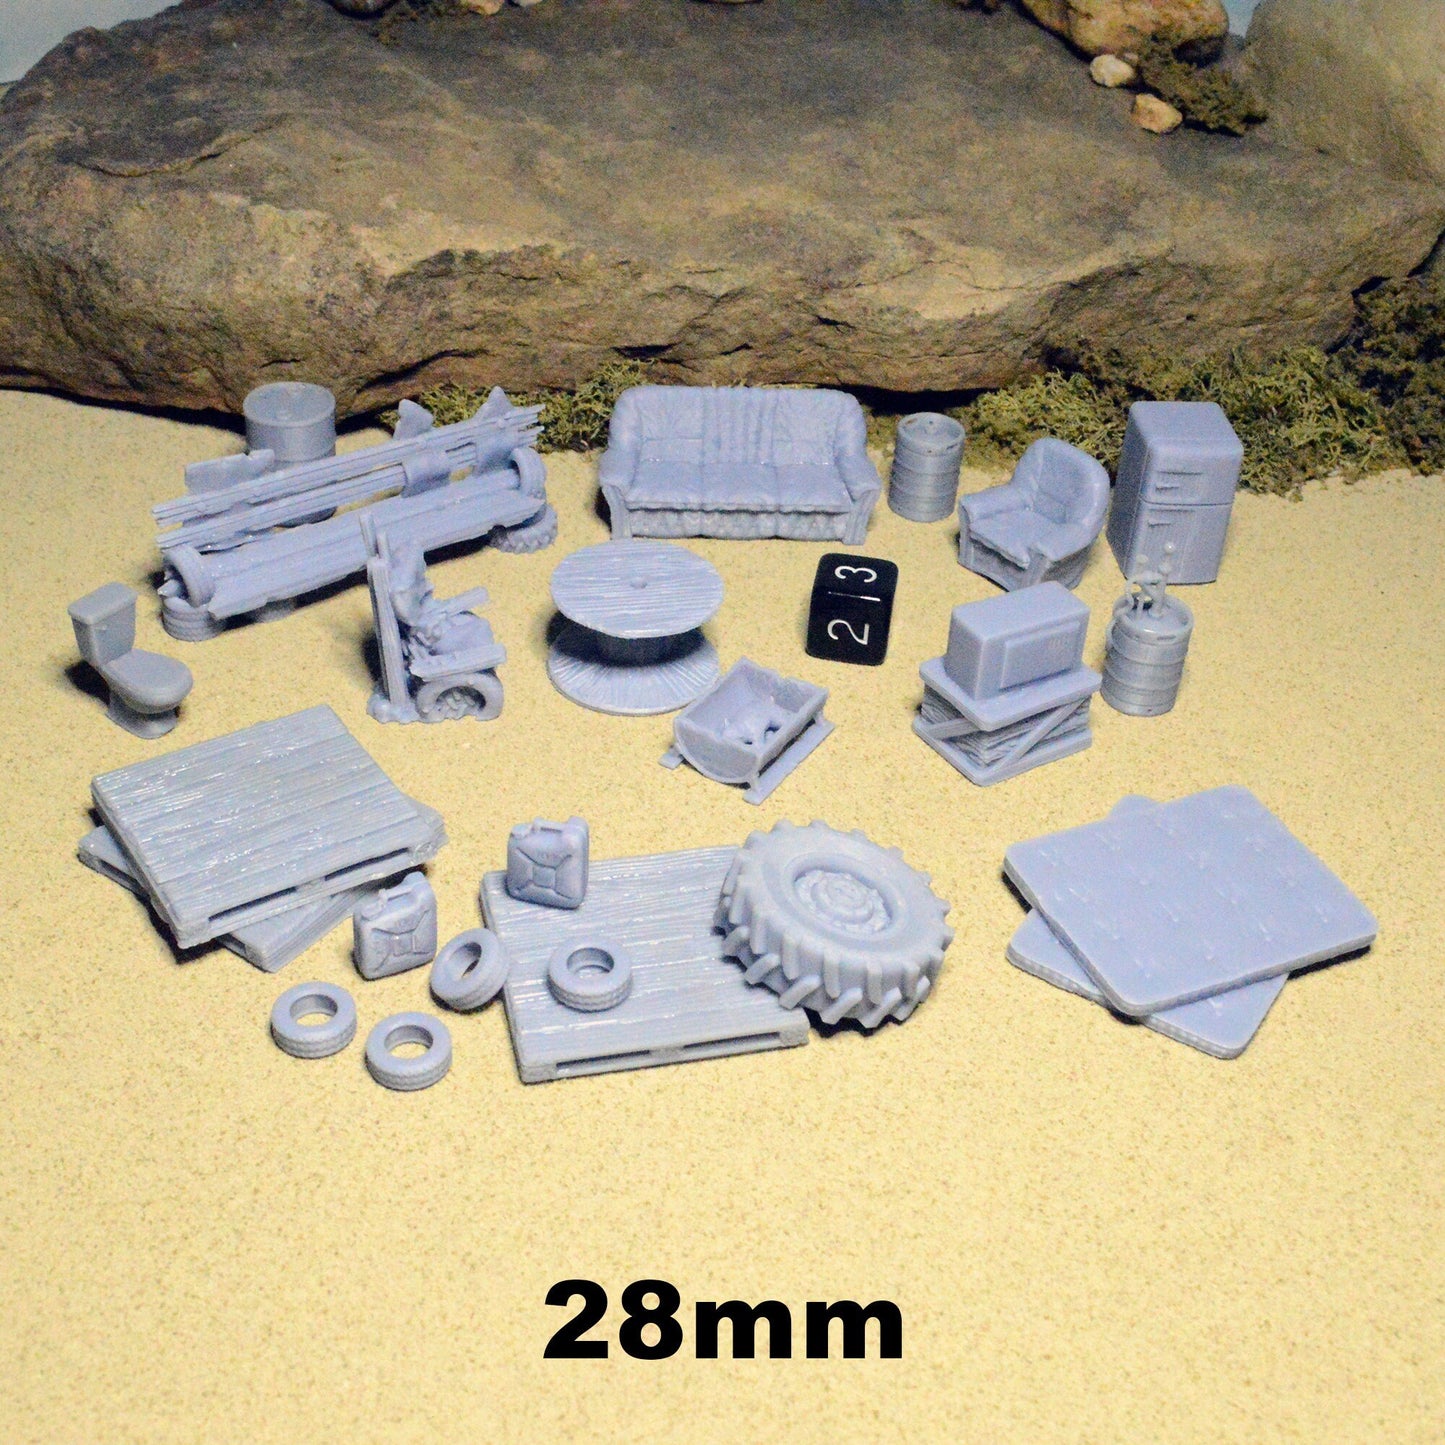 Clean Wasteland Furniture 20mm 28mm 32mm for Gaslands Terrain, Fallout Urban Post-Apocalyptic, This is Not a Test